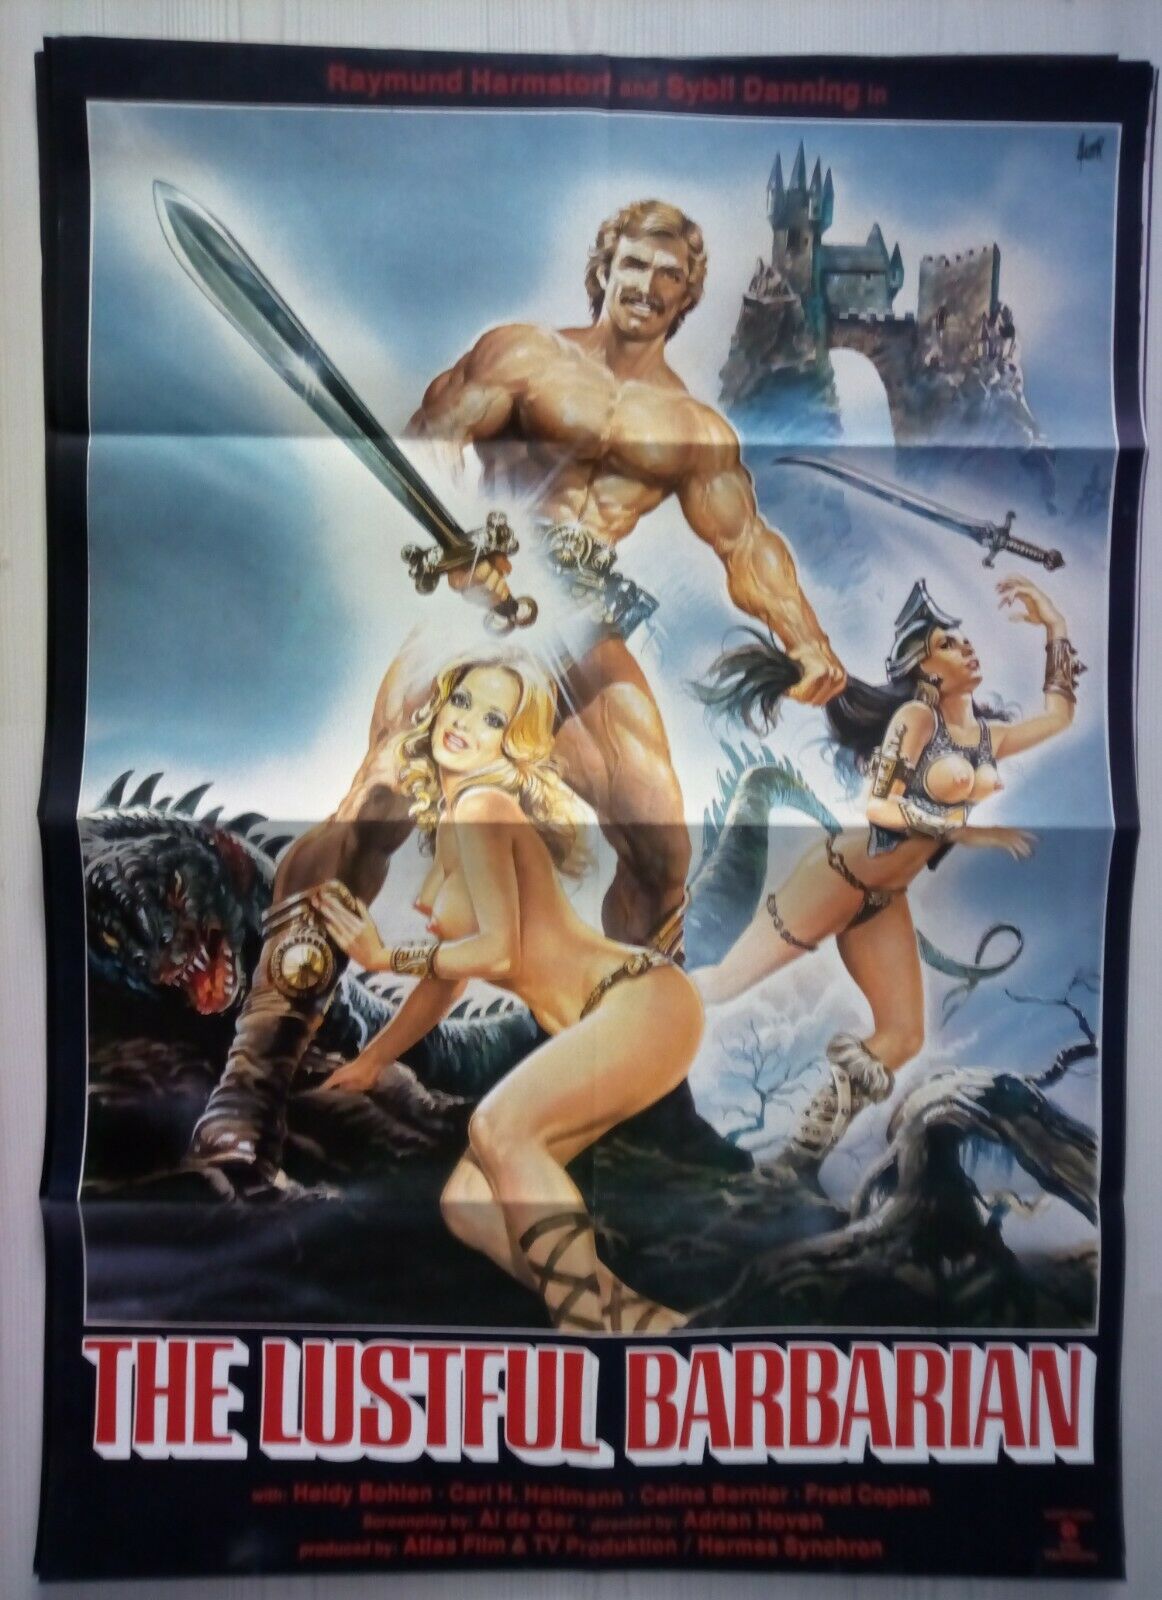 Movie Poster -  The Lustful Barbarian